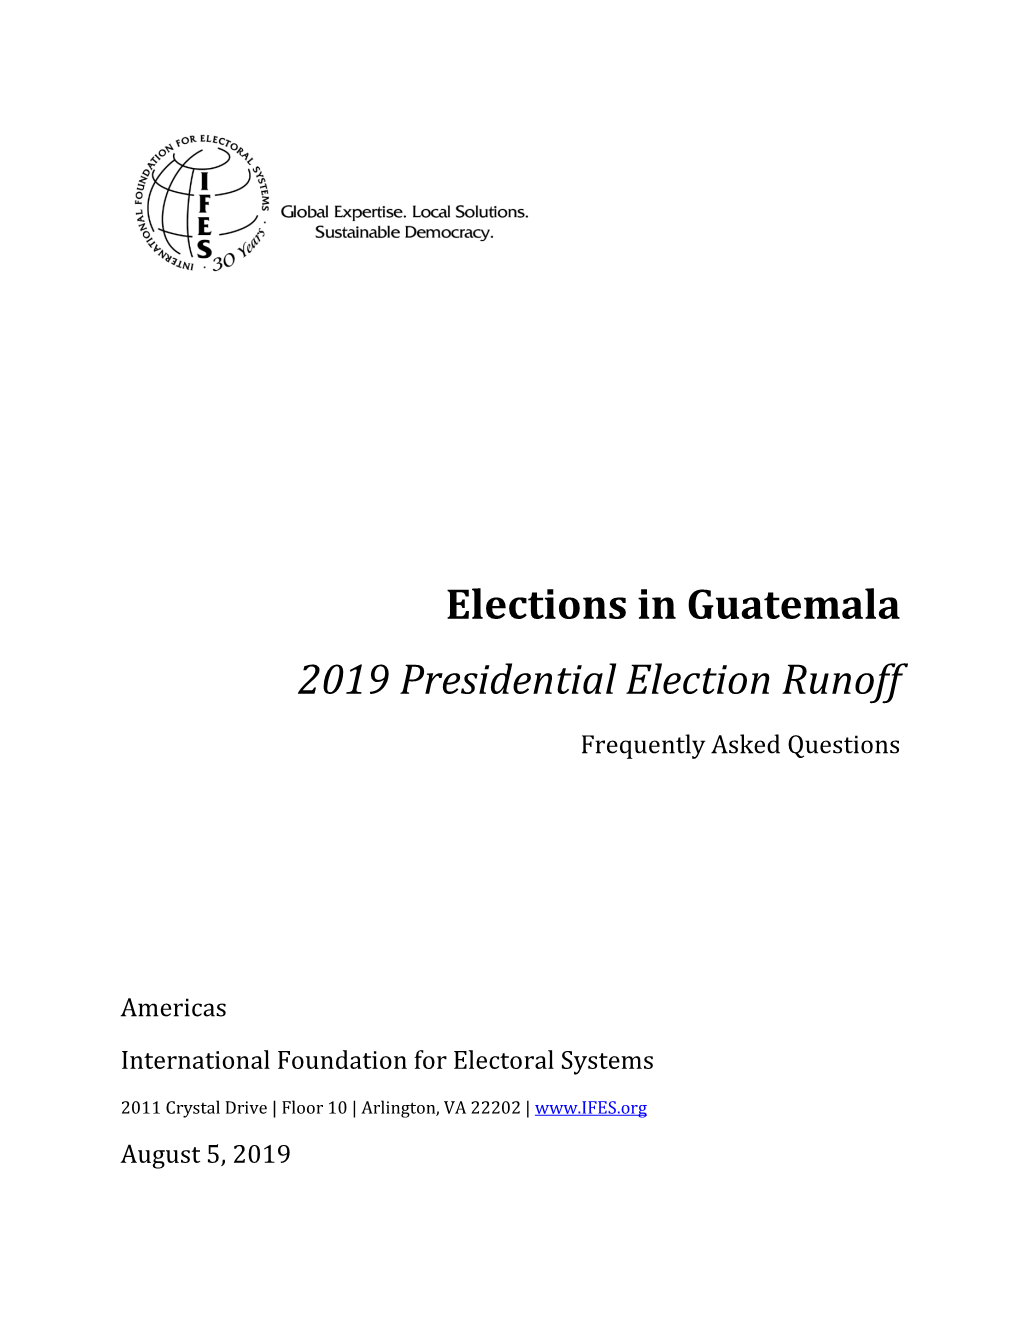 IFES, Faqs, 'Elections in Guatemala: 2019 Presidential Election Runoff'